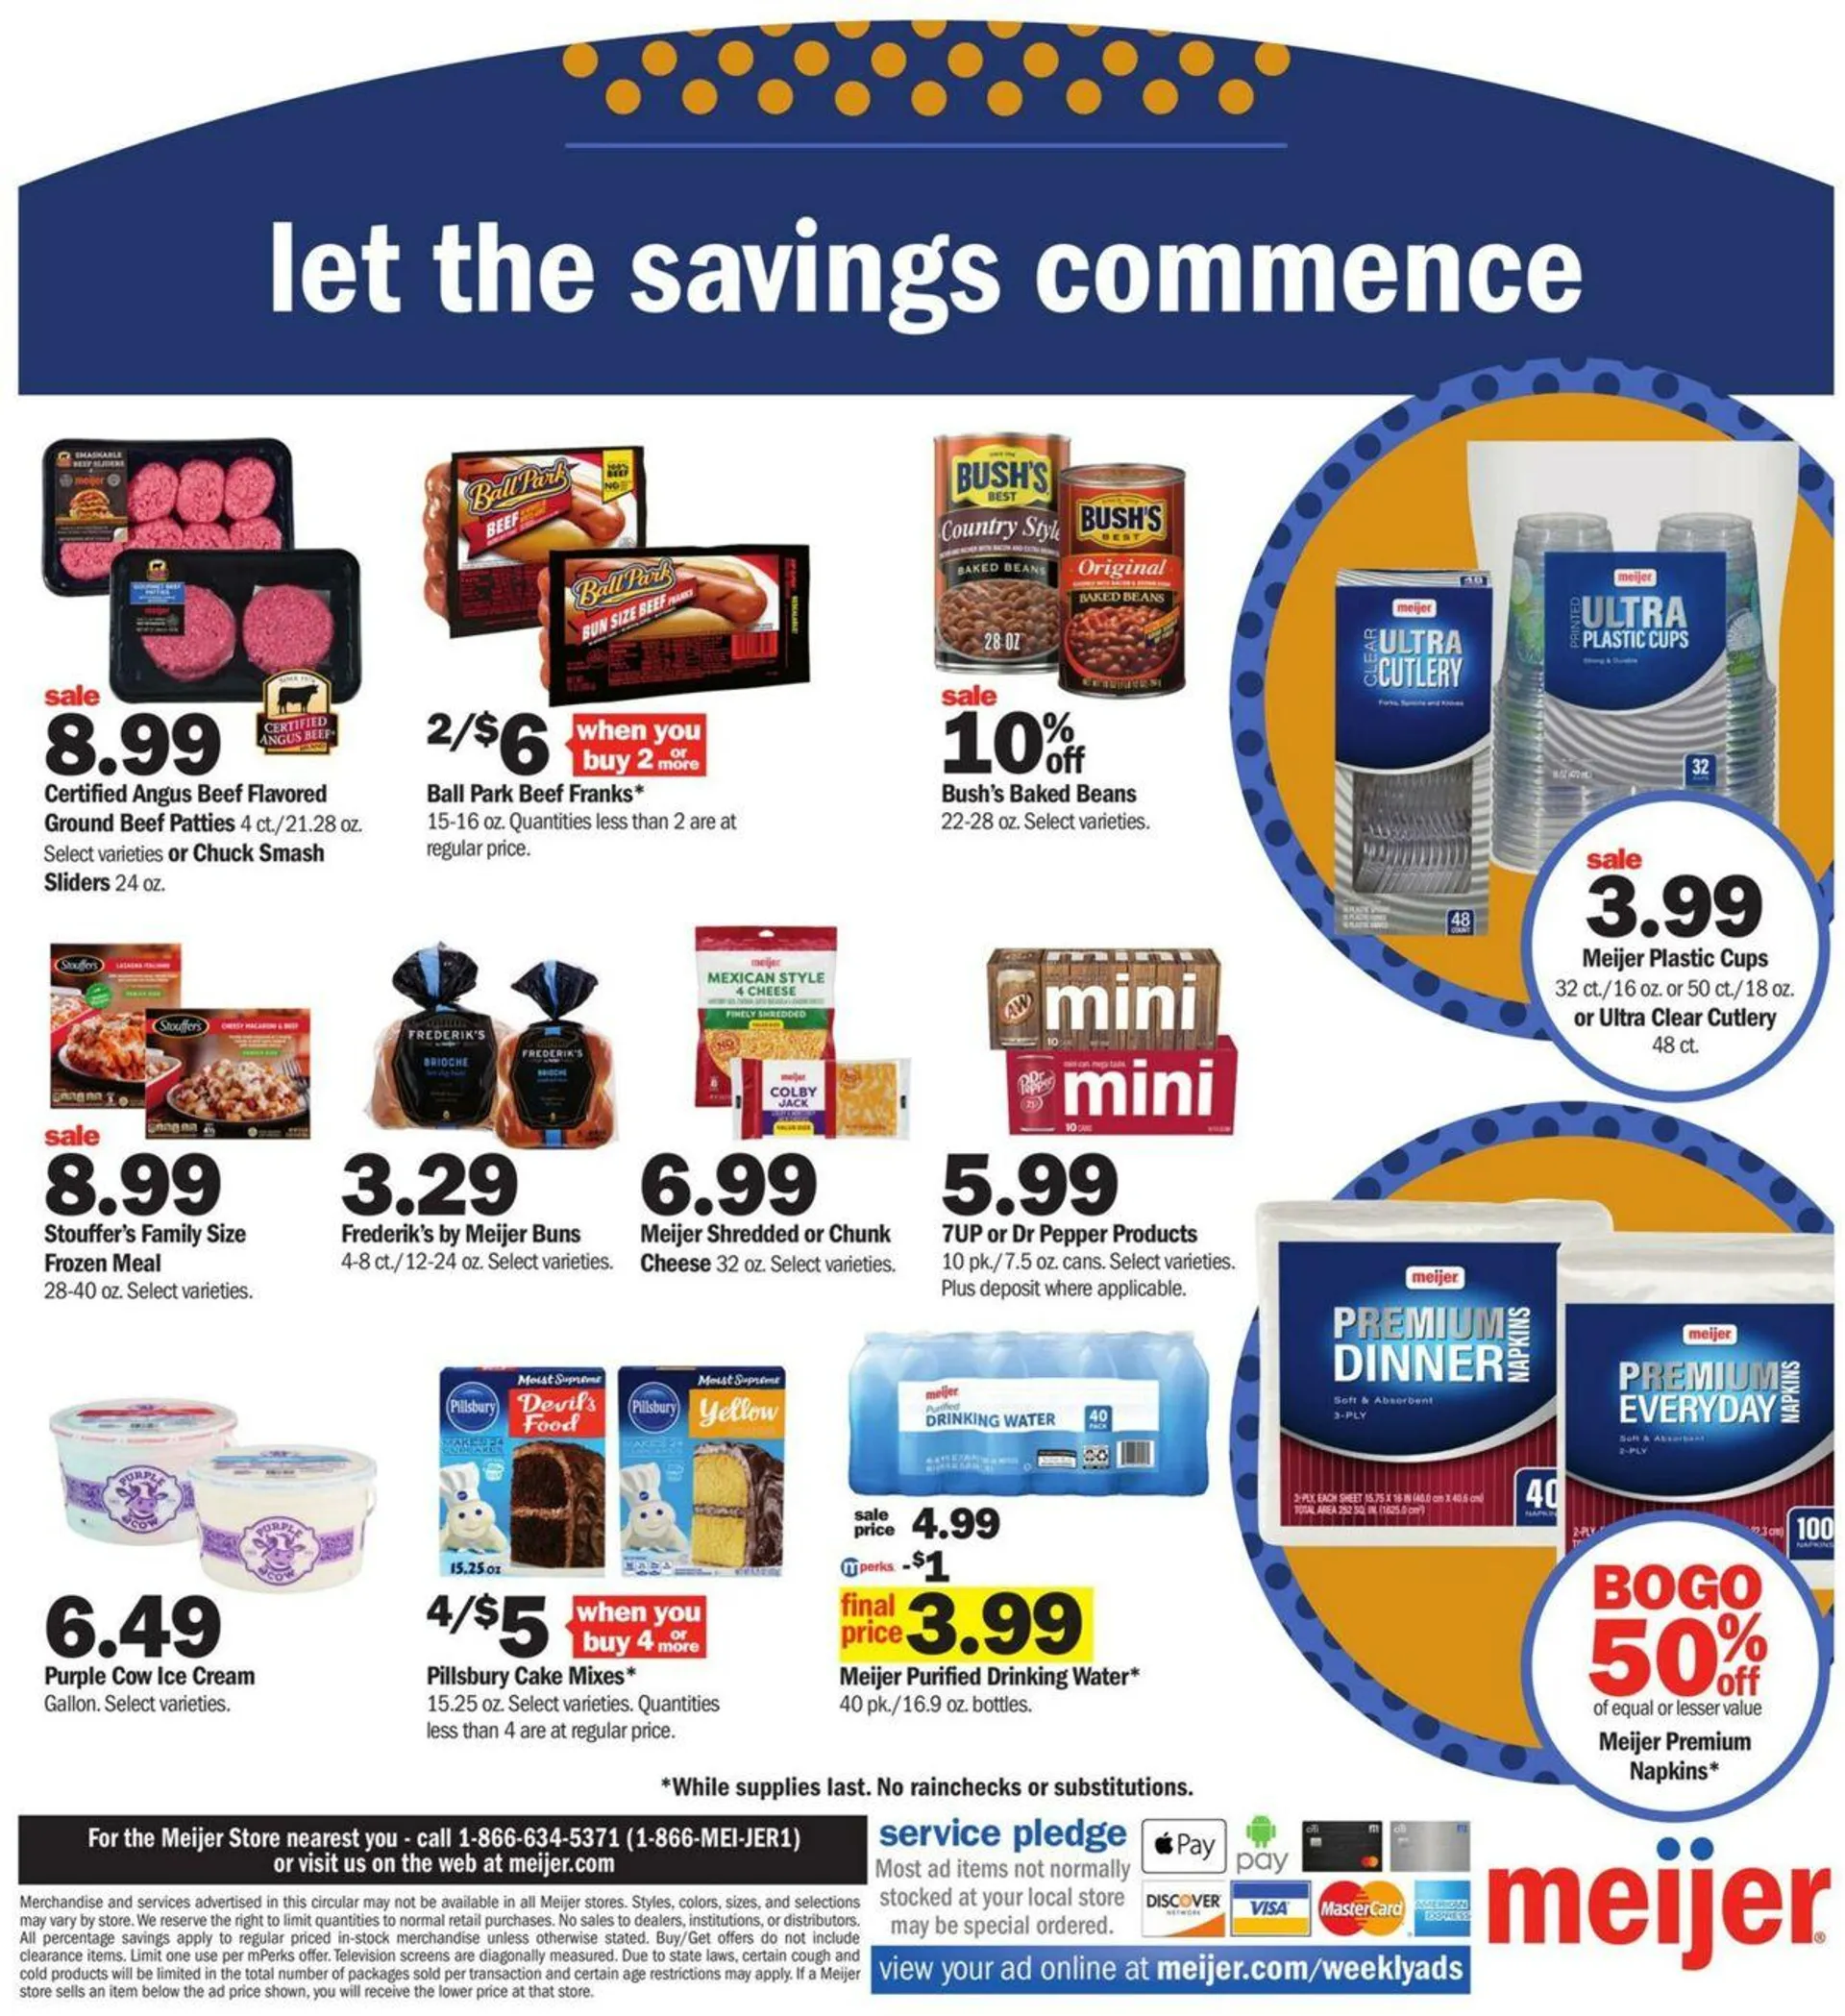 Meijer Current weekly ad - 2